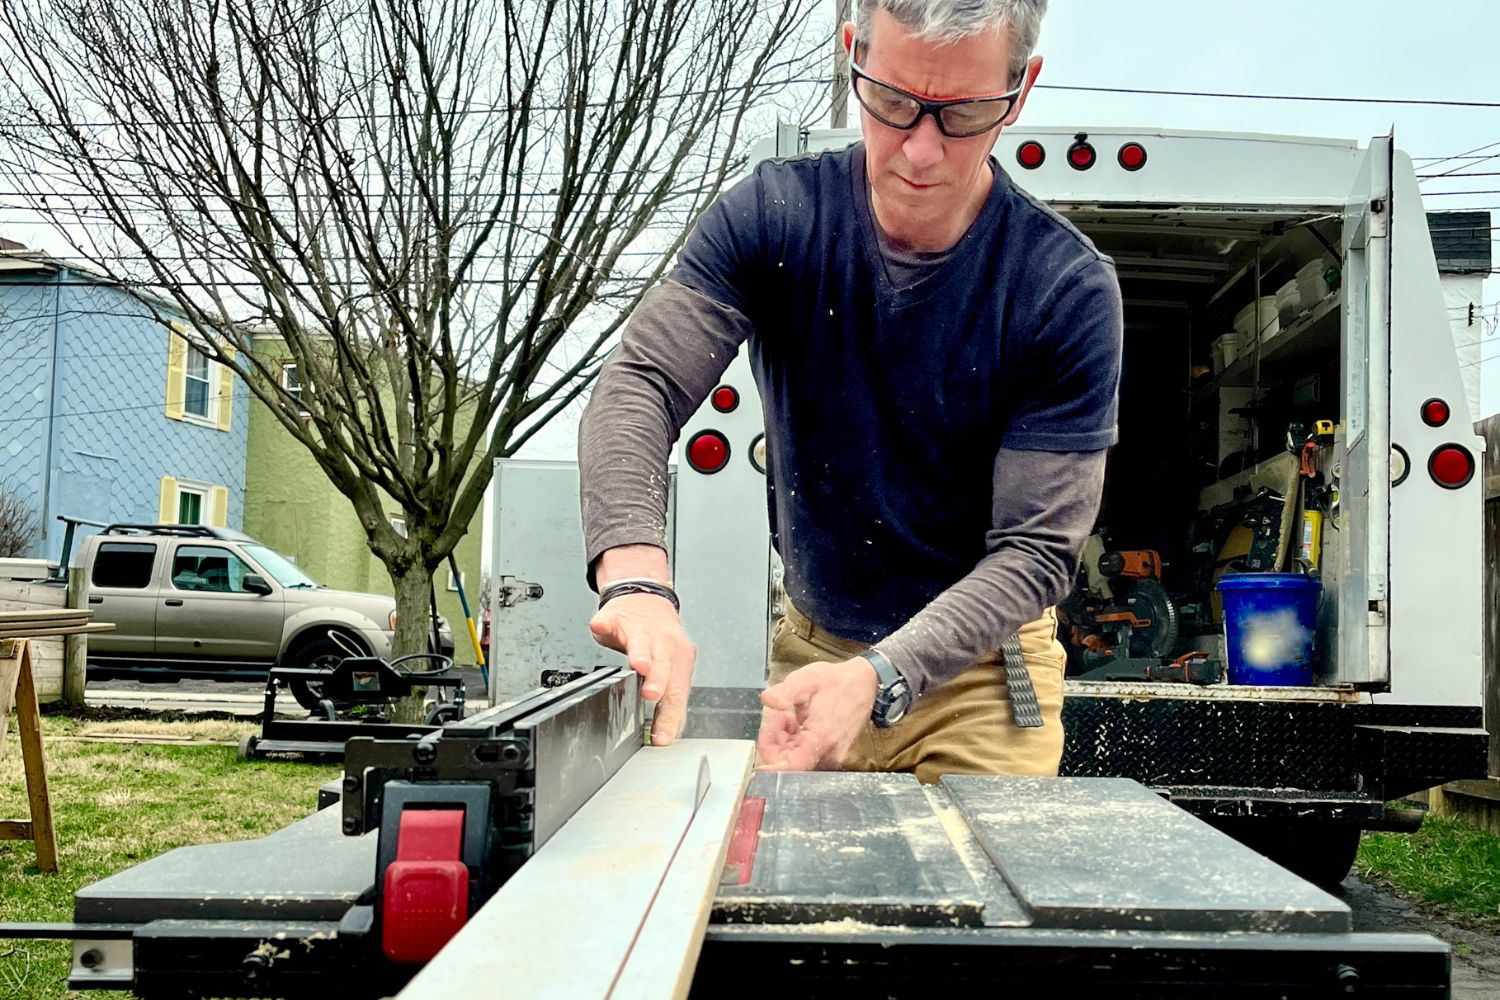 A person using the best table saw blade to cut a long board